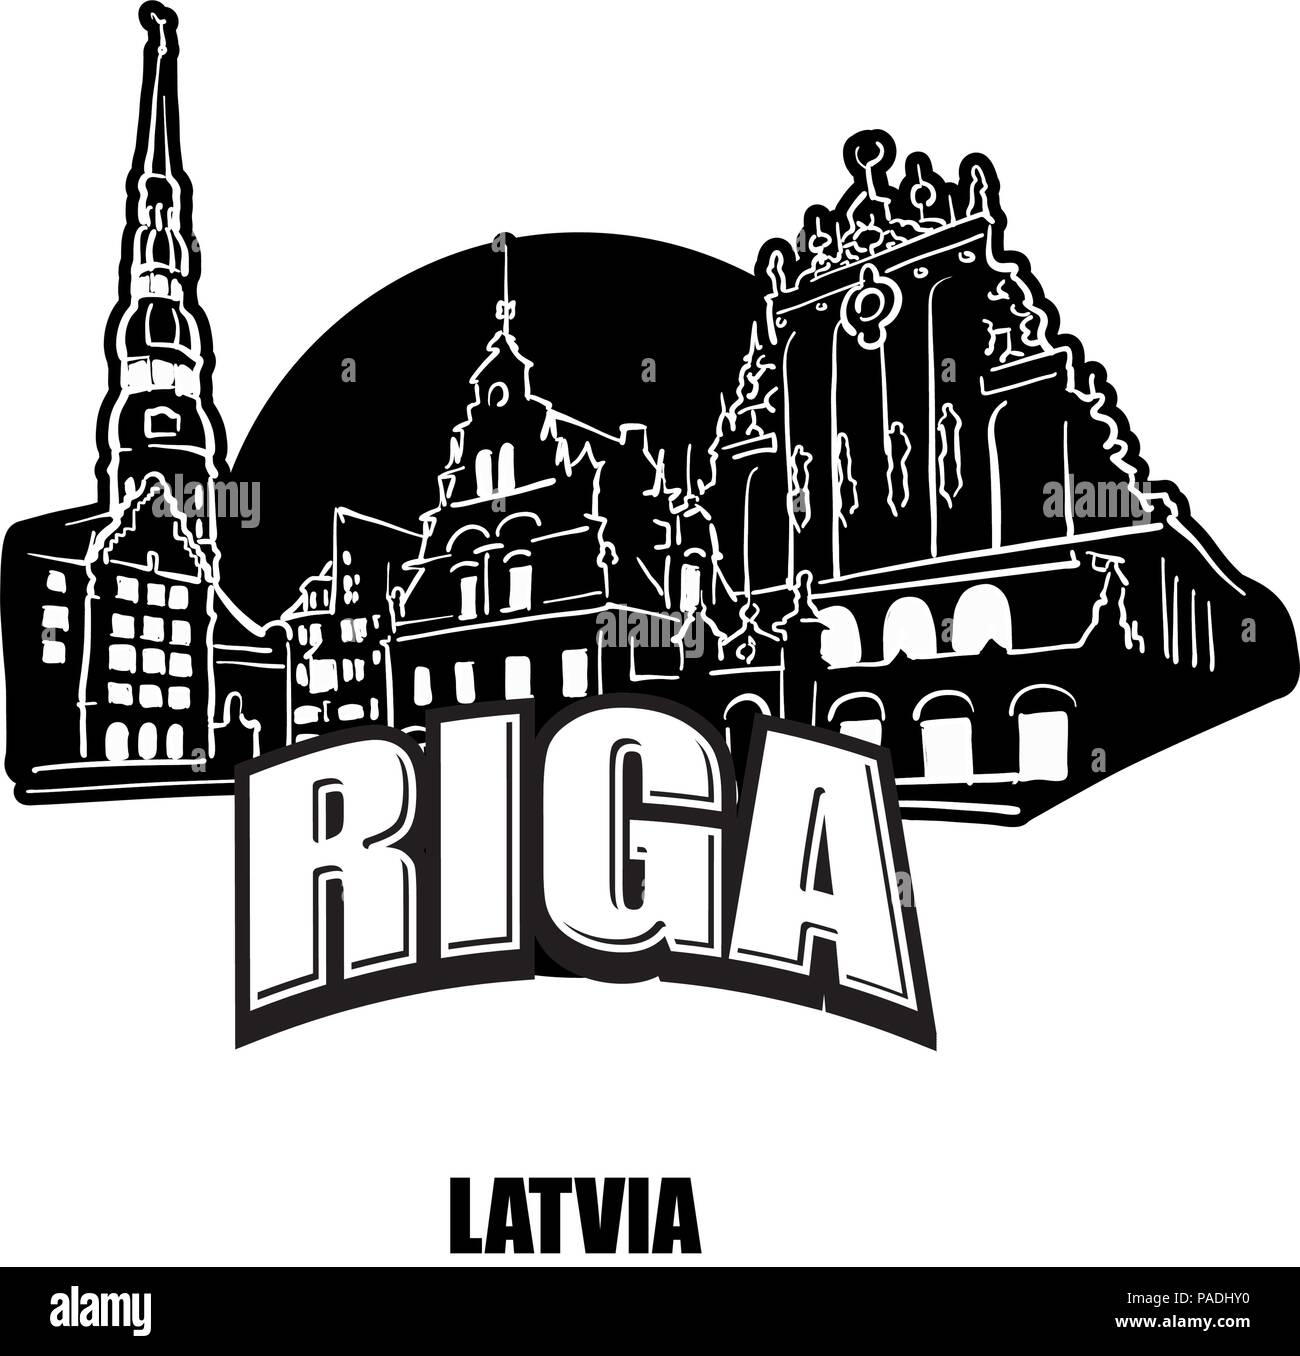 Riga, Lativa, black and white logo for high quality prints. Hand drawn vector sketch. Stock Vector